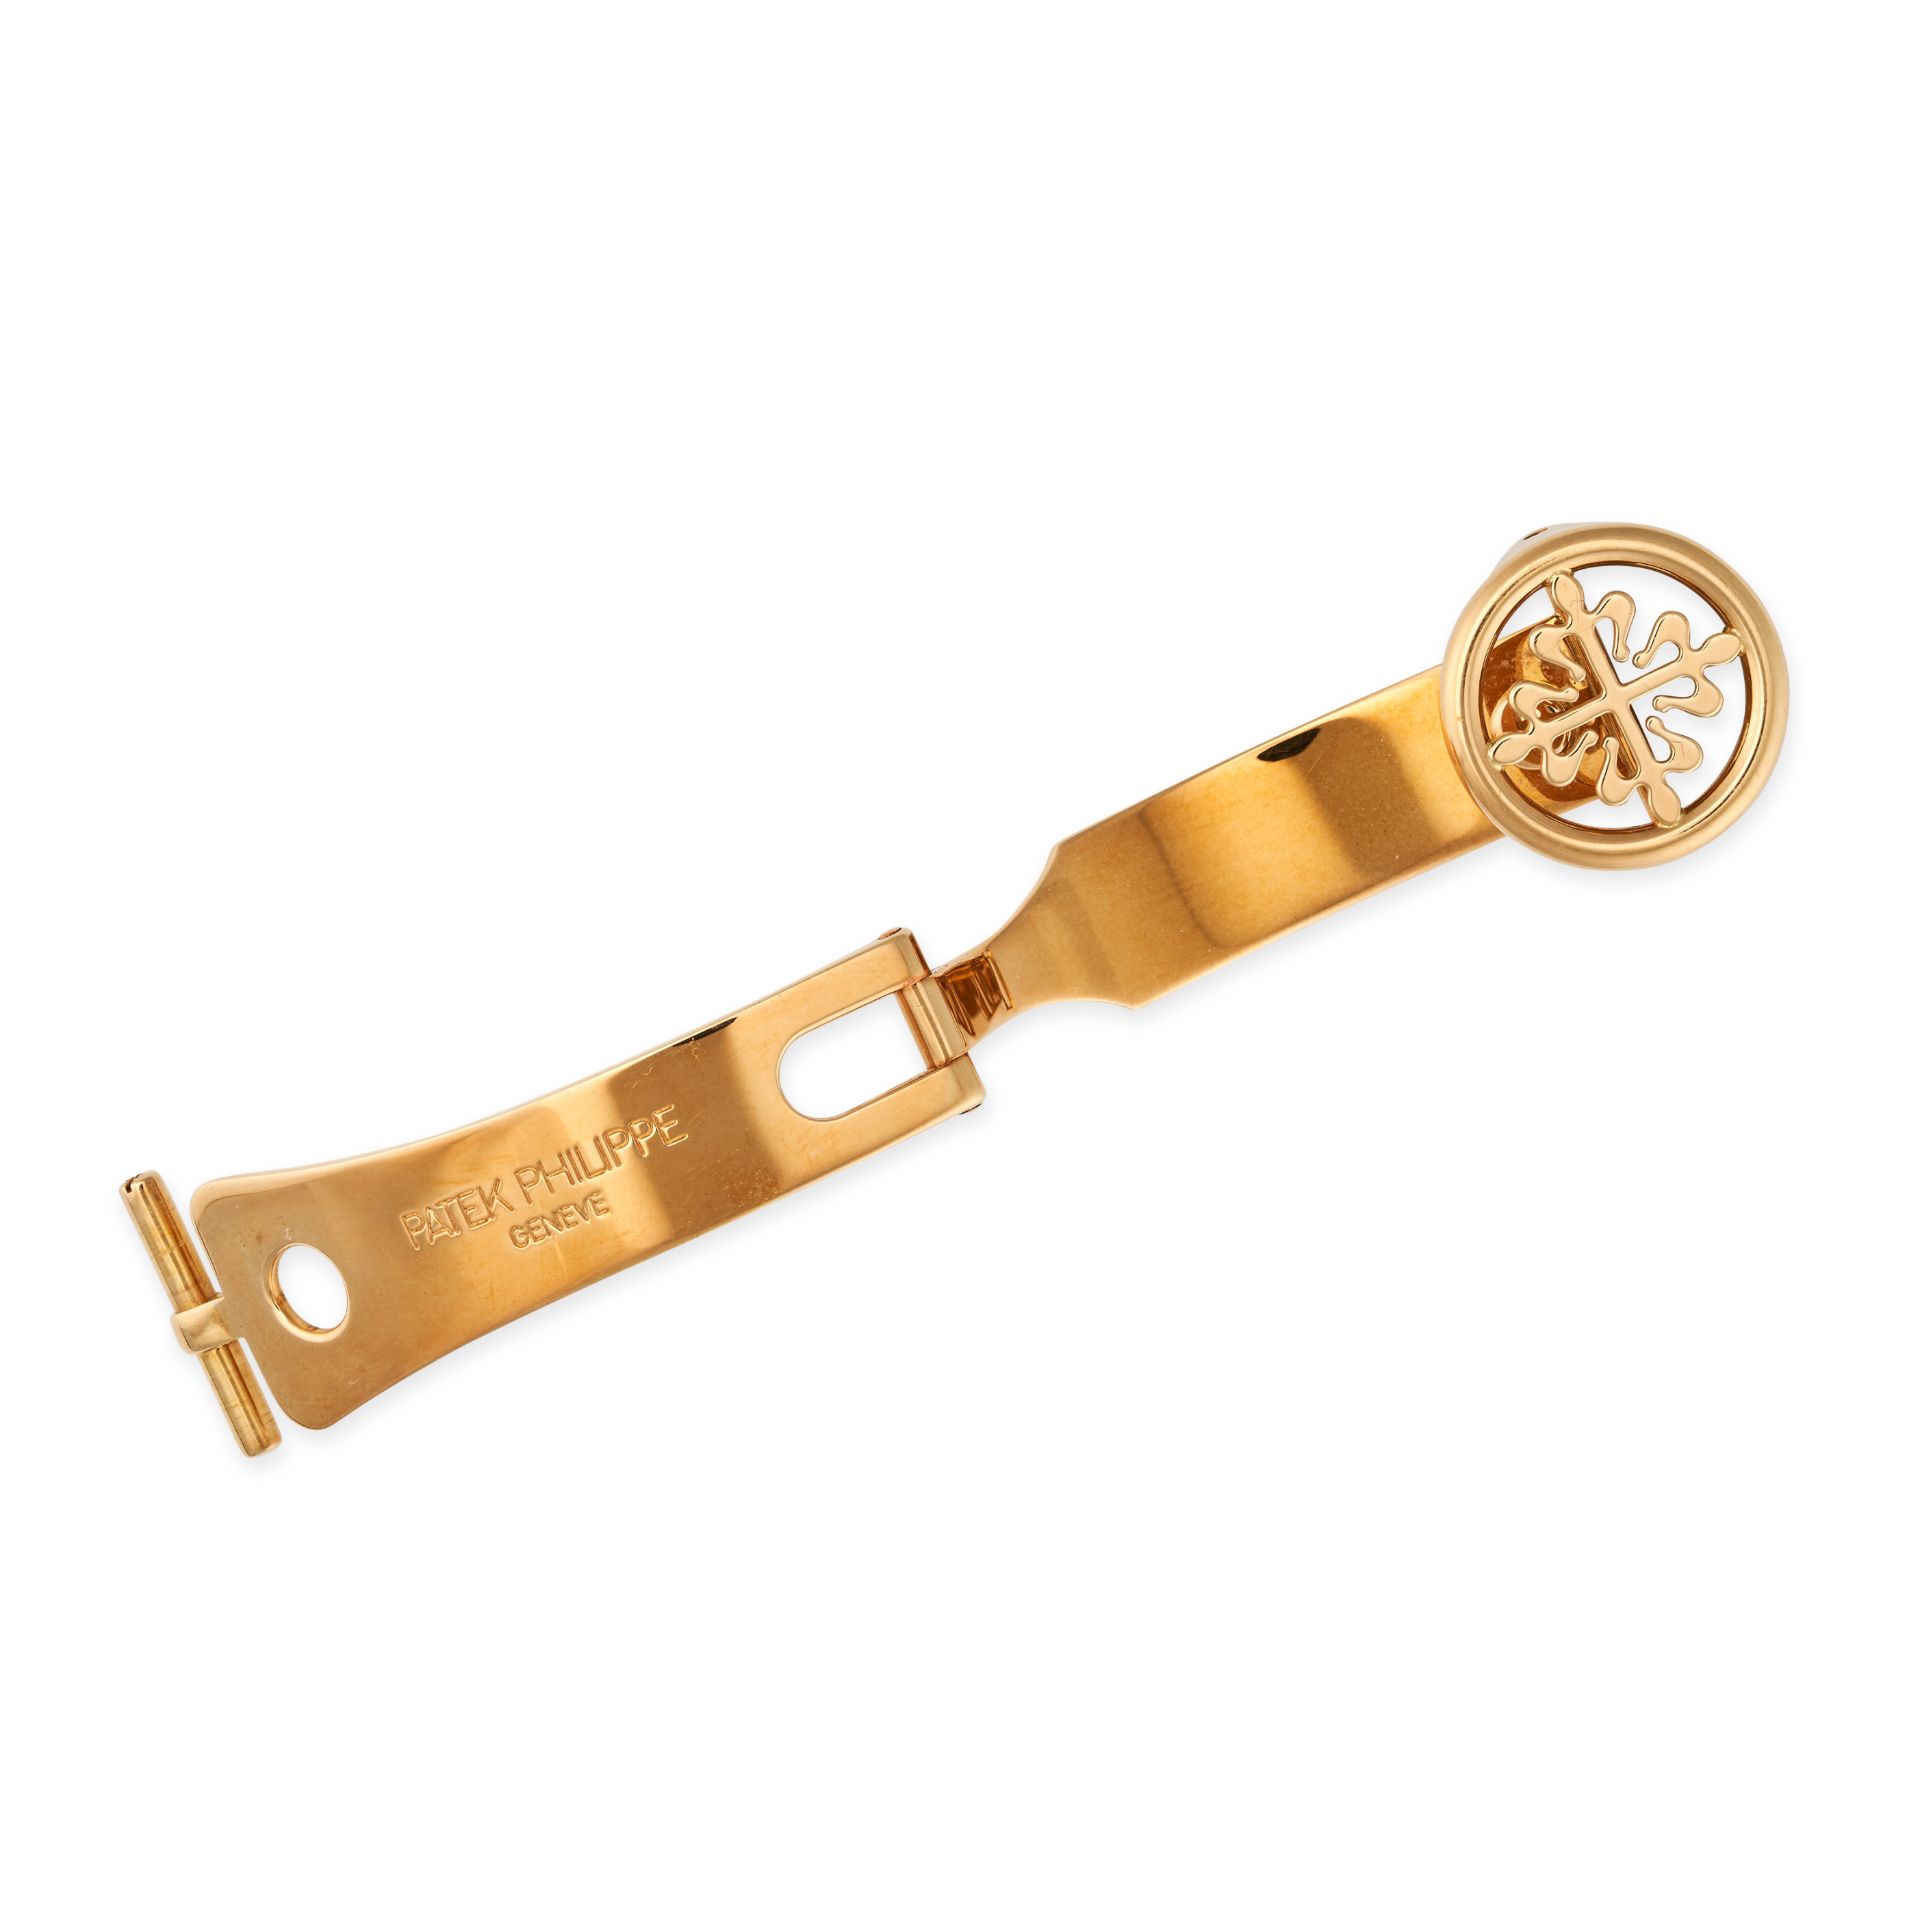 PATEK PHILIPPE - A PATEK PHILIPPE DEPLOYMENT / DEPLOYANT CLASP AND BUCKLE in 18ct yellow gold, de...